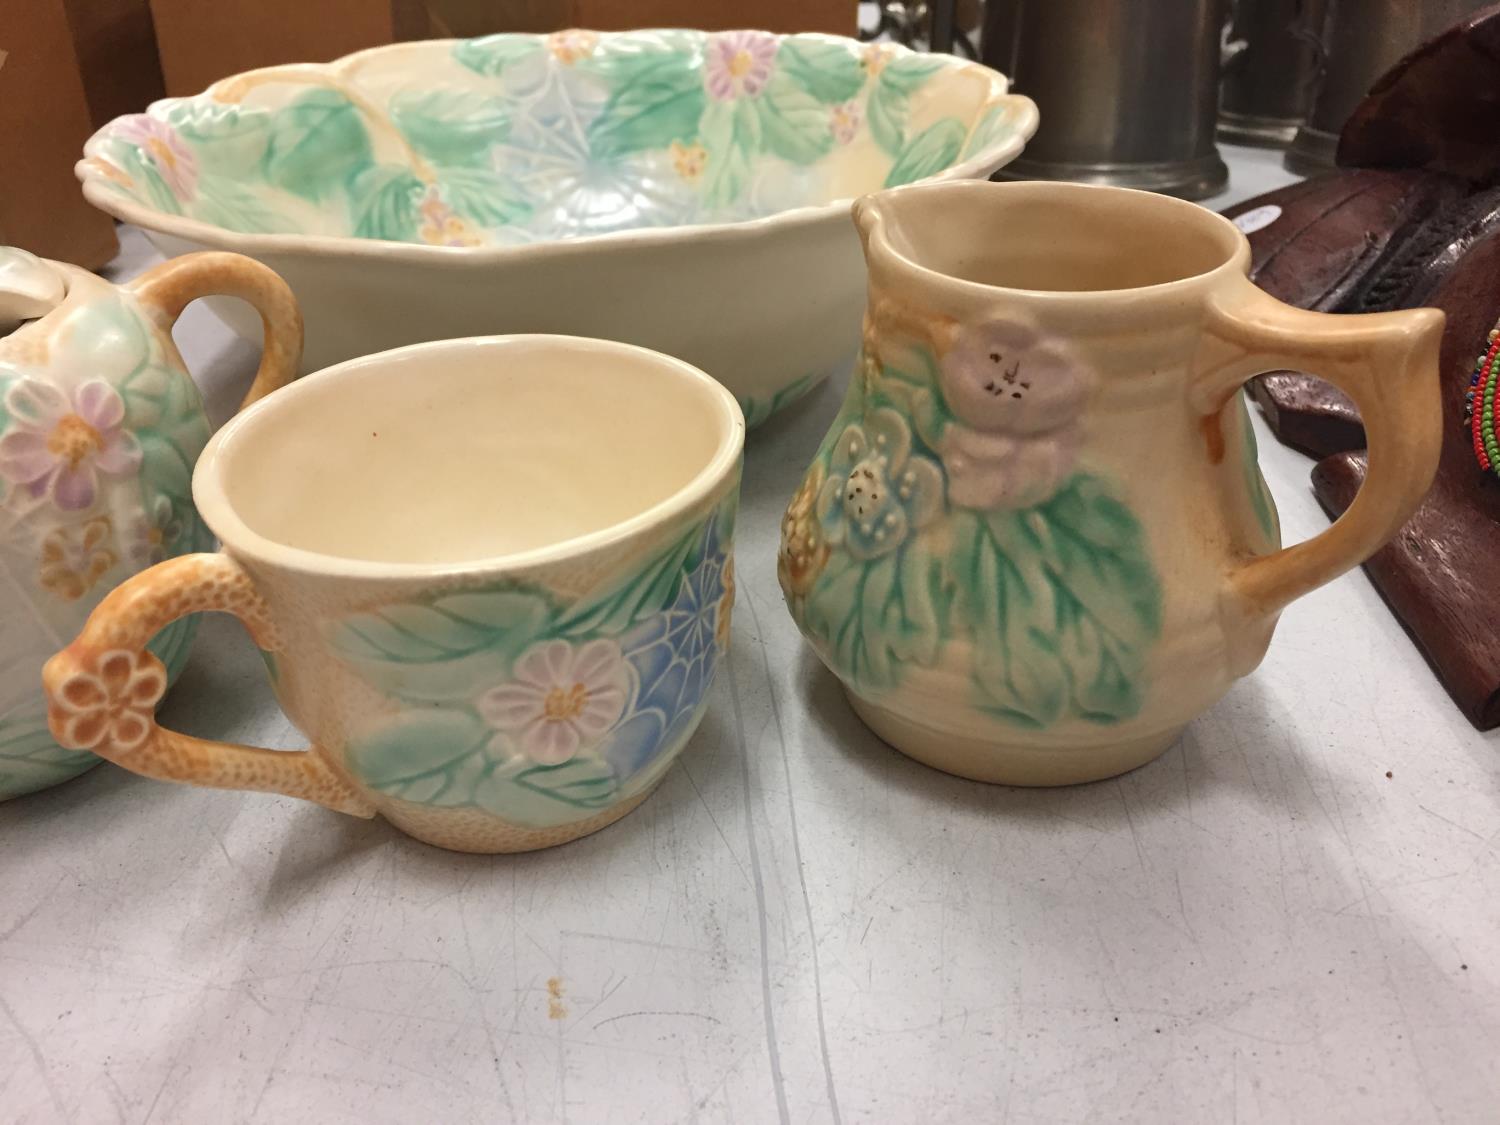 FOUR PIECES OF AVON WARE TO INCLUDE A JUG AND A FRUIT BOWL - Image 2 of 4